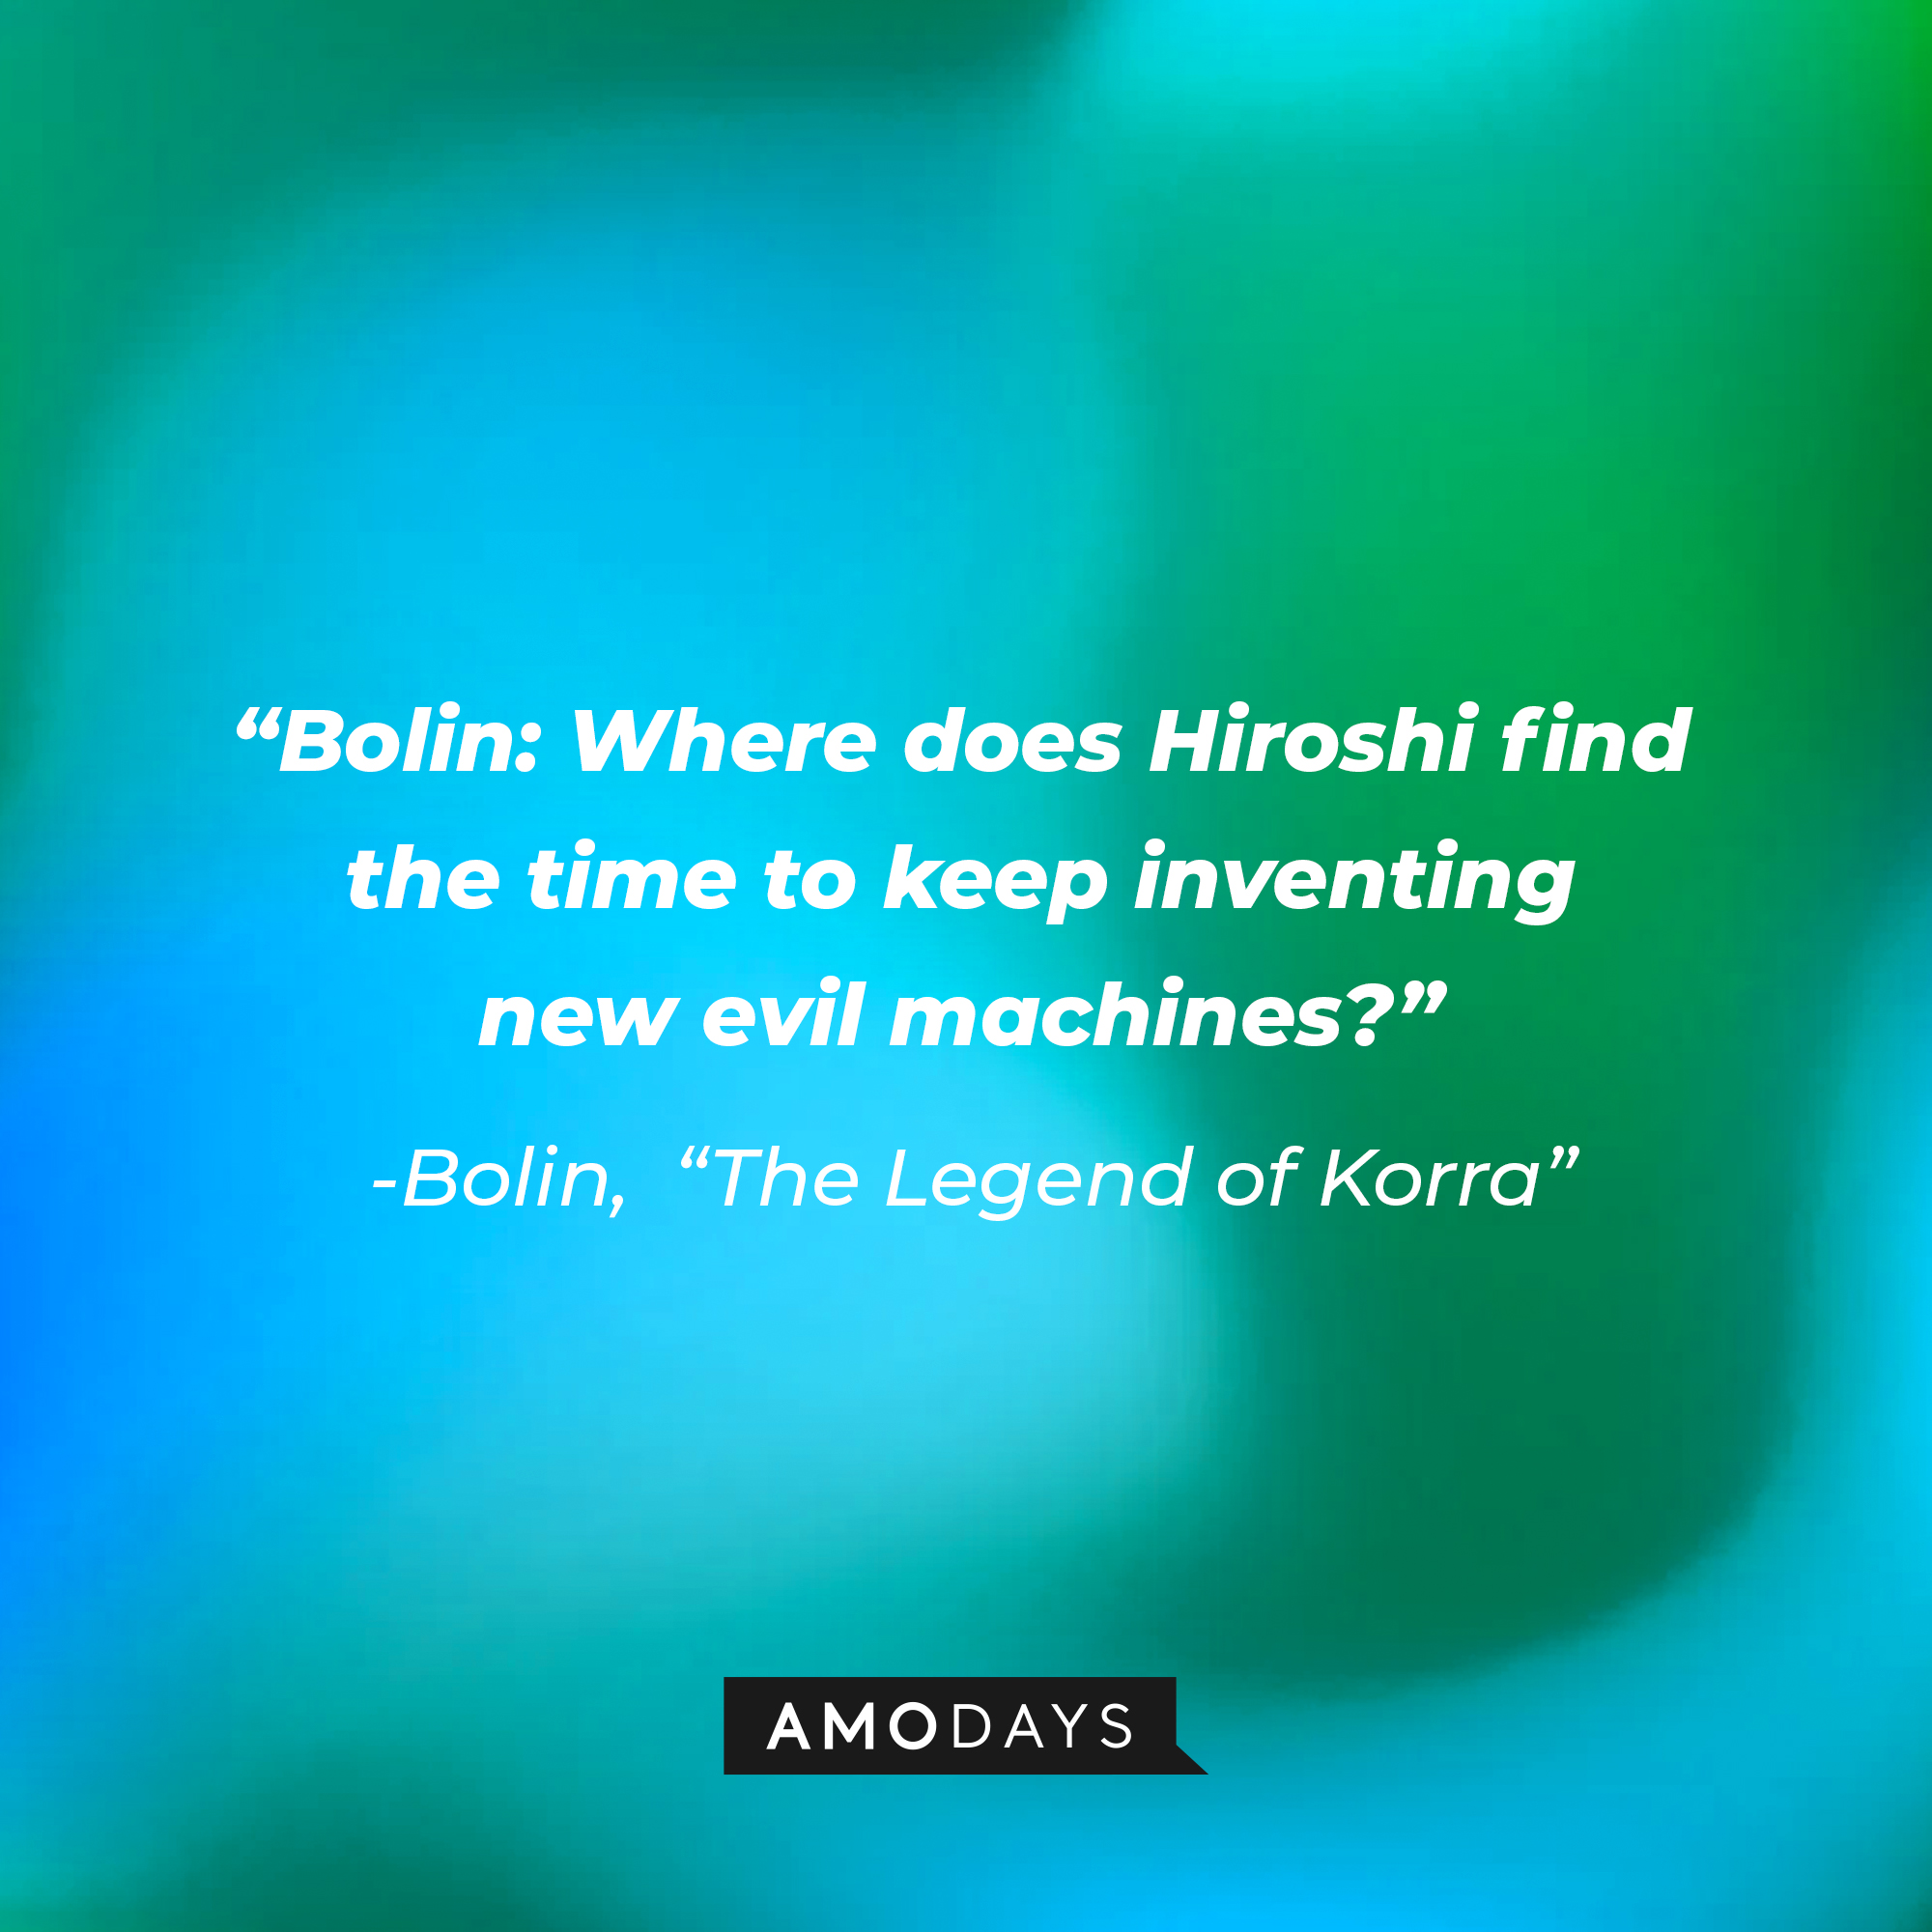 Bolin’s quote in “Avatar: The Legend of Korra:” “Where does Hiroshi find the time to keep inventing new evil machines?" | Source: Amodays